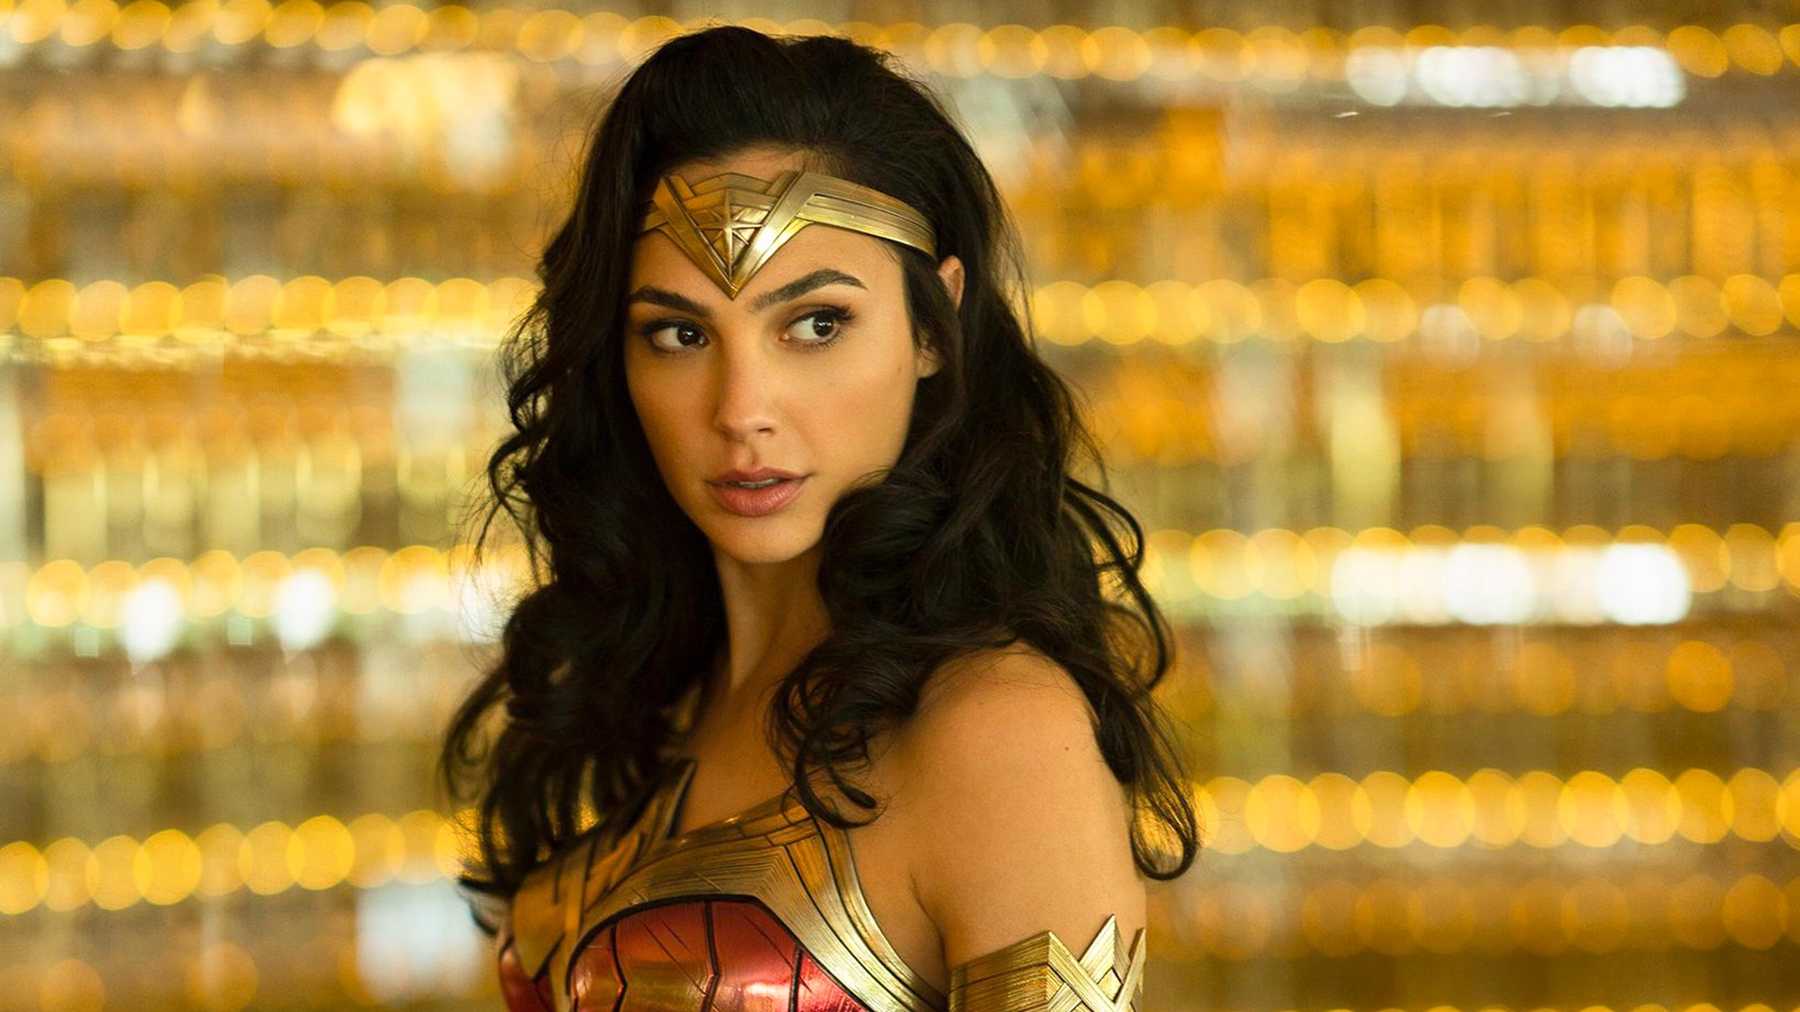 Gal Gadot Tattoos: Does the Wonder Woman Star Have Any Ink? - wide 2